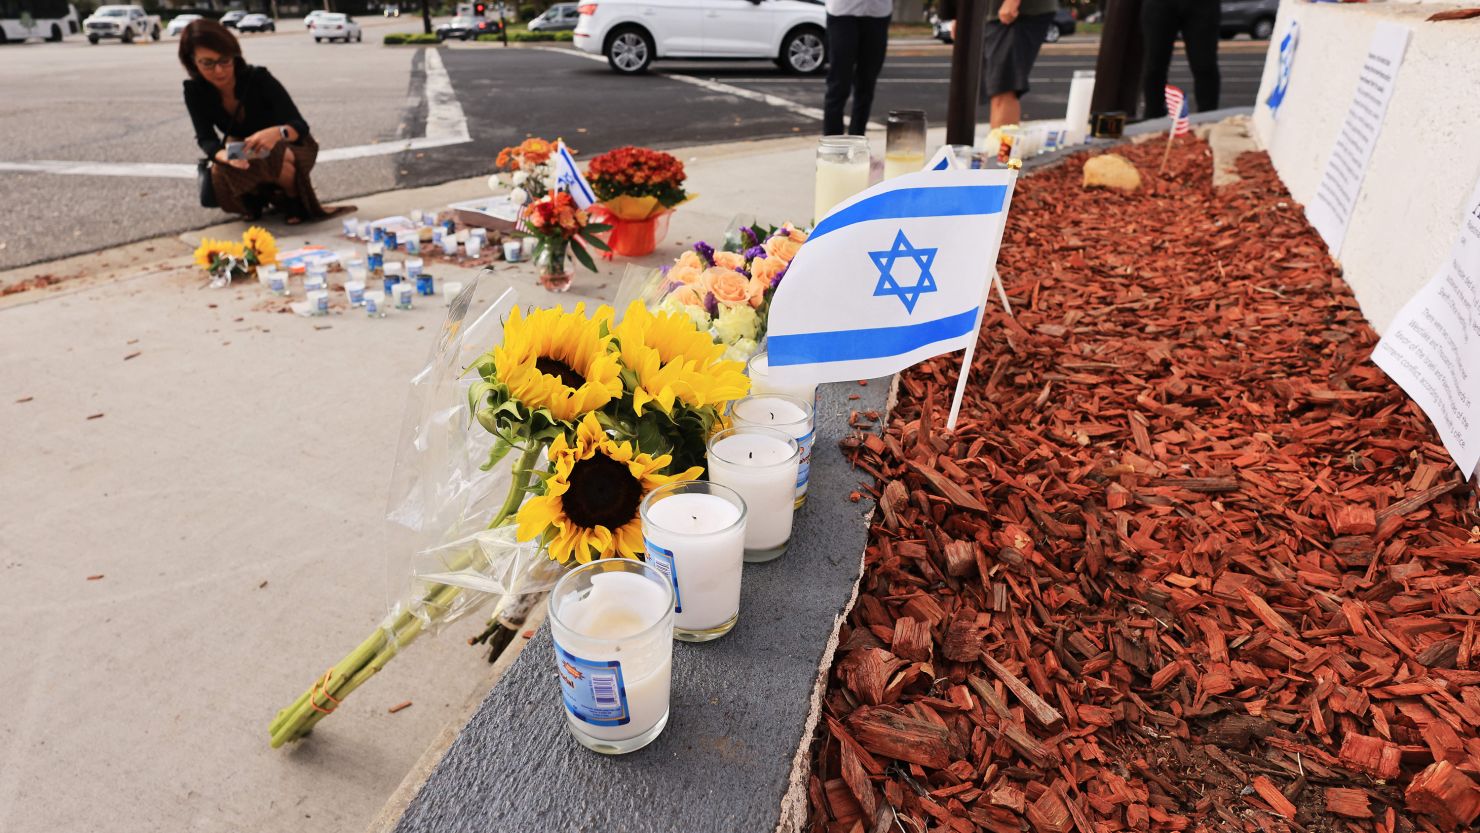 Flowers, candles and flags decorate a makeshift memorial for Paul Kessler a 69-year-old Jewish man, who died after an altercation at dueling pro-Israel and pro-Palestinian rallies.